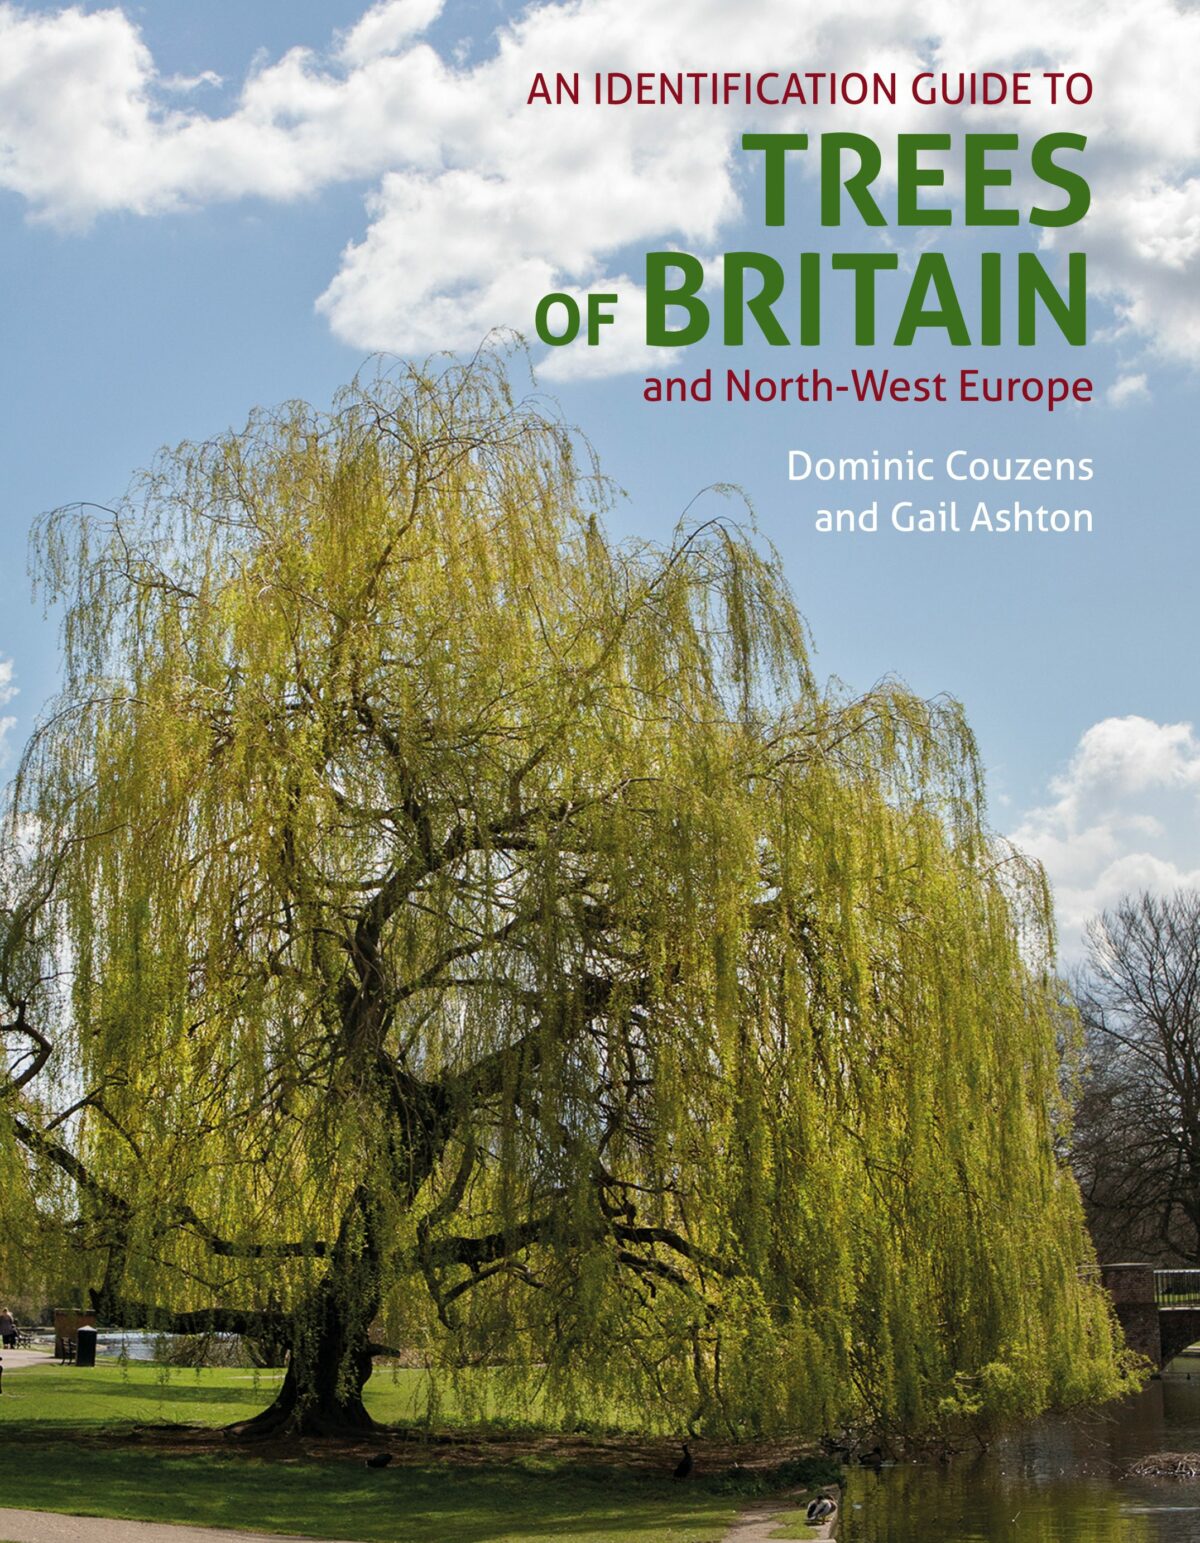 Author Q&A with Dominic Couzens and Gail Ashton: An Identification Guide to Trees of Britain and North-West Europe